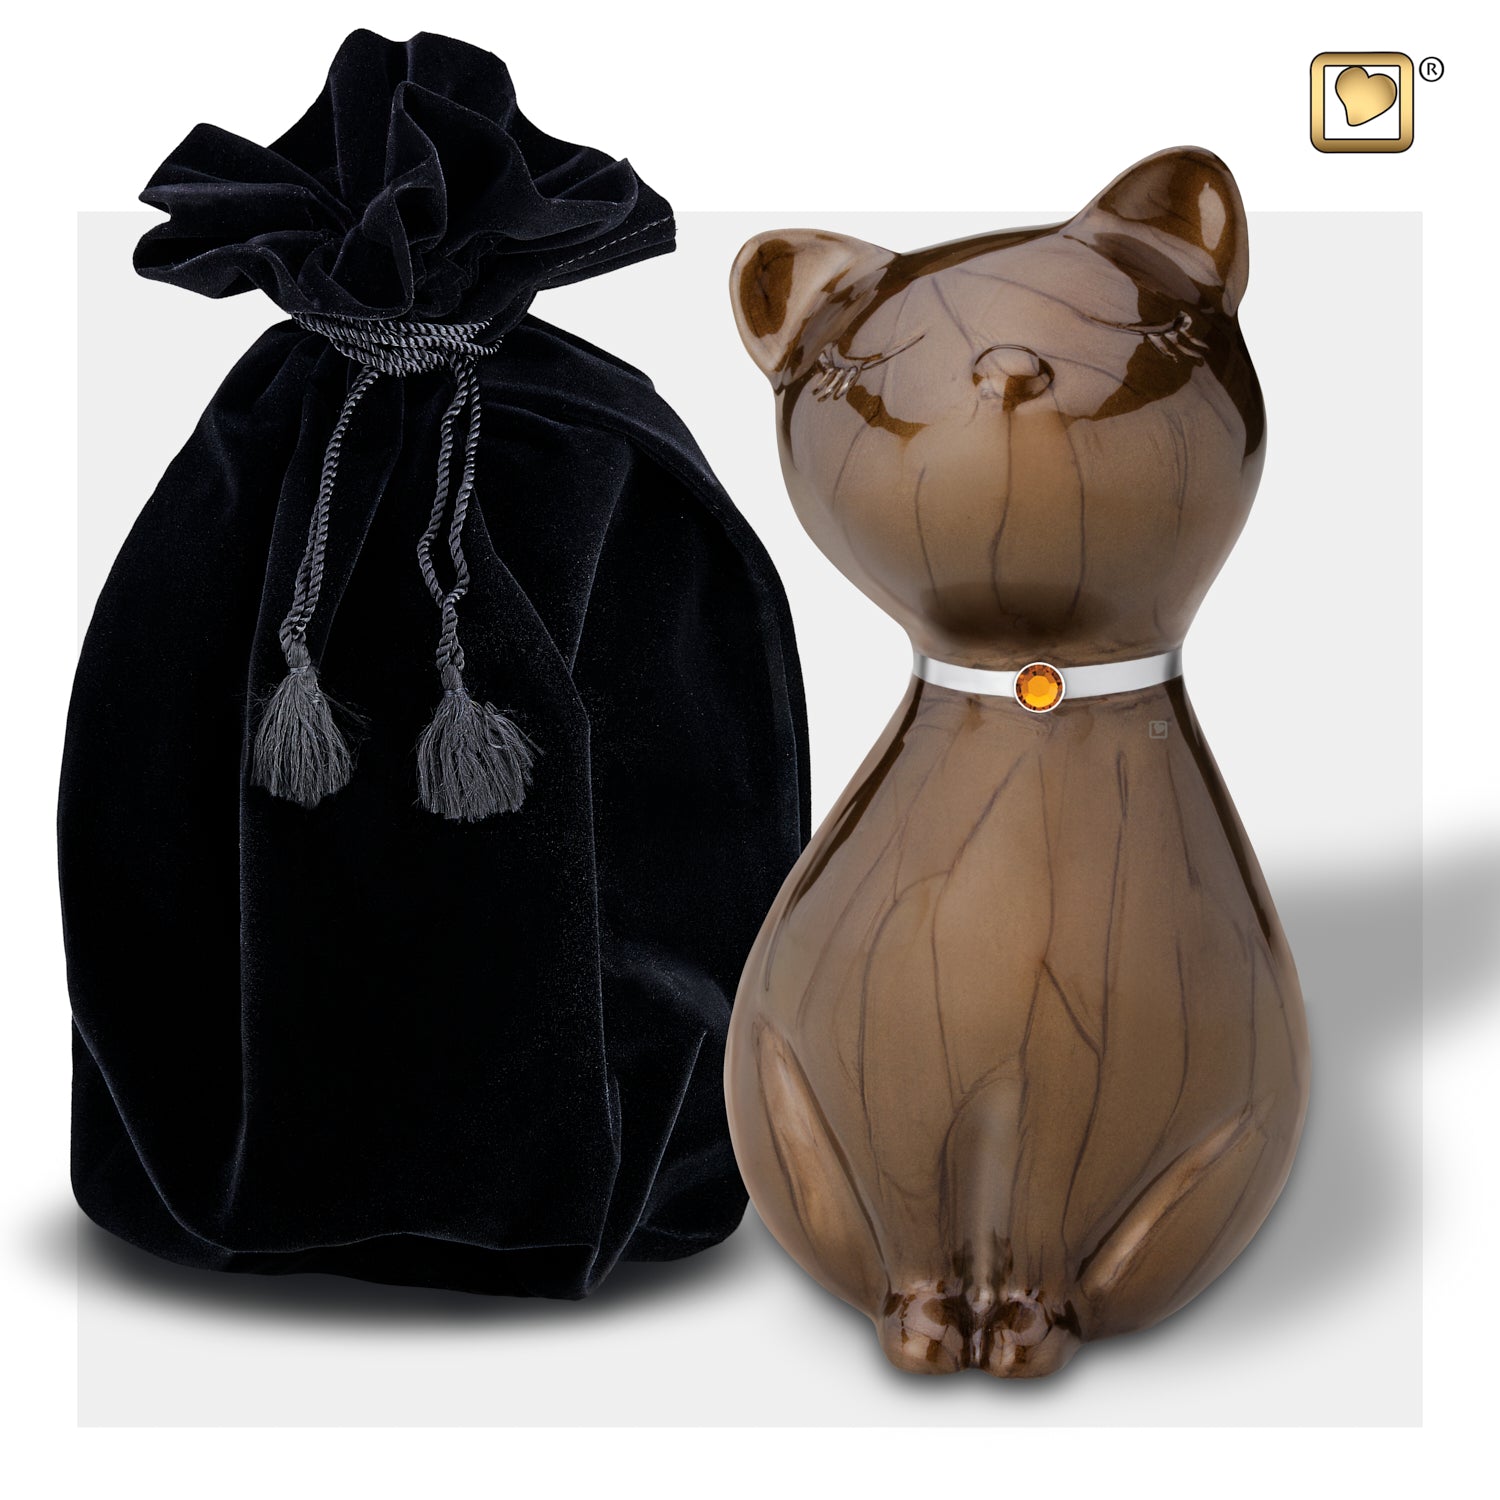 Bronze Cat Cremation Urn with Base